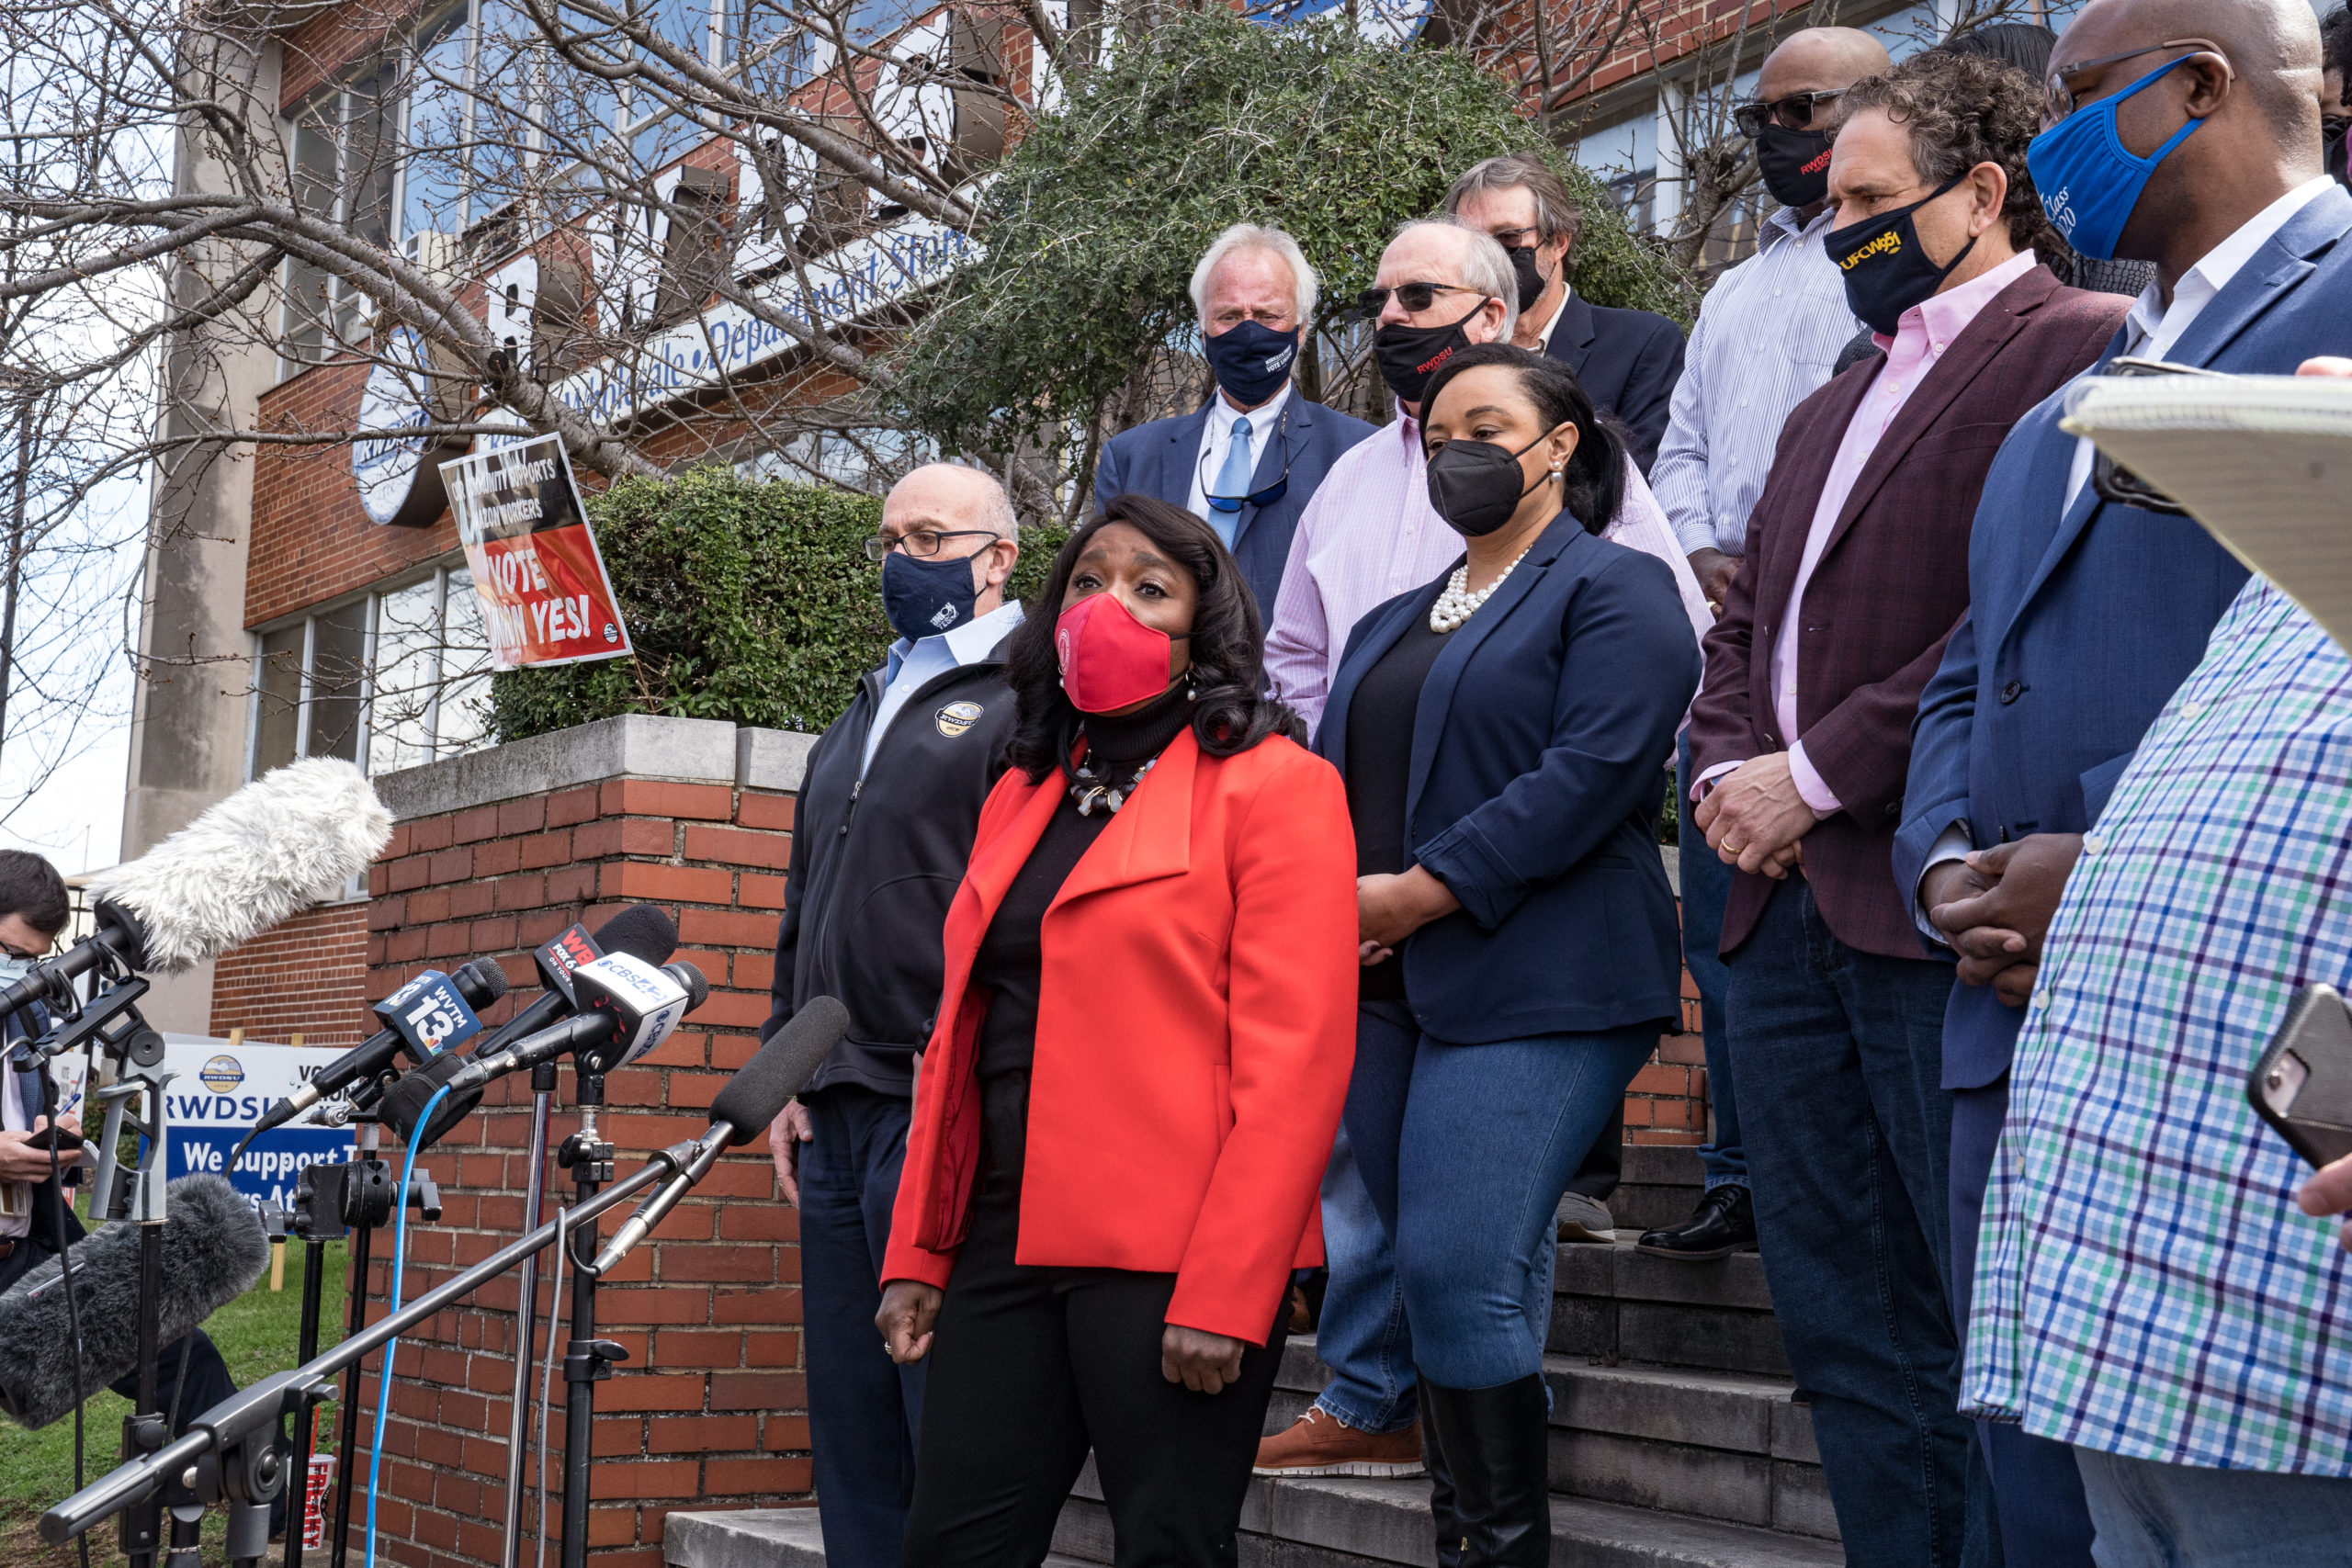 Rep. Terri Sewell and other members of Congress speak to the media after meeting with workers and organizers involved in the Amazon unionization effort on March 5, 2021 in Bessemer, Alabama. (Megan Varner/Getty Images)